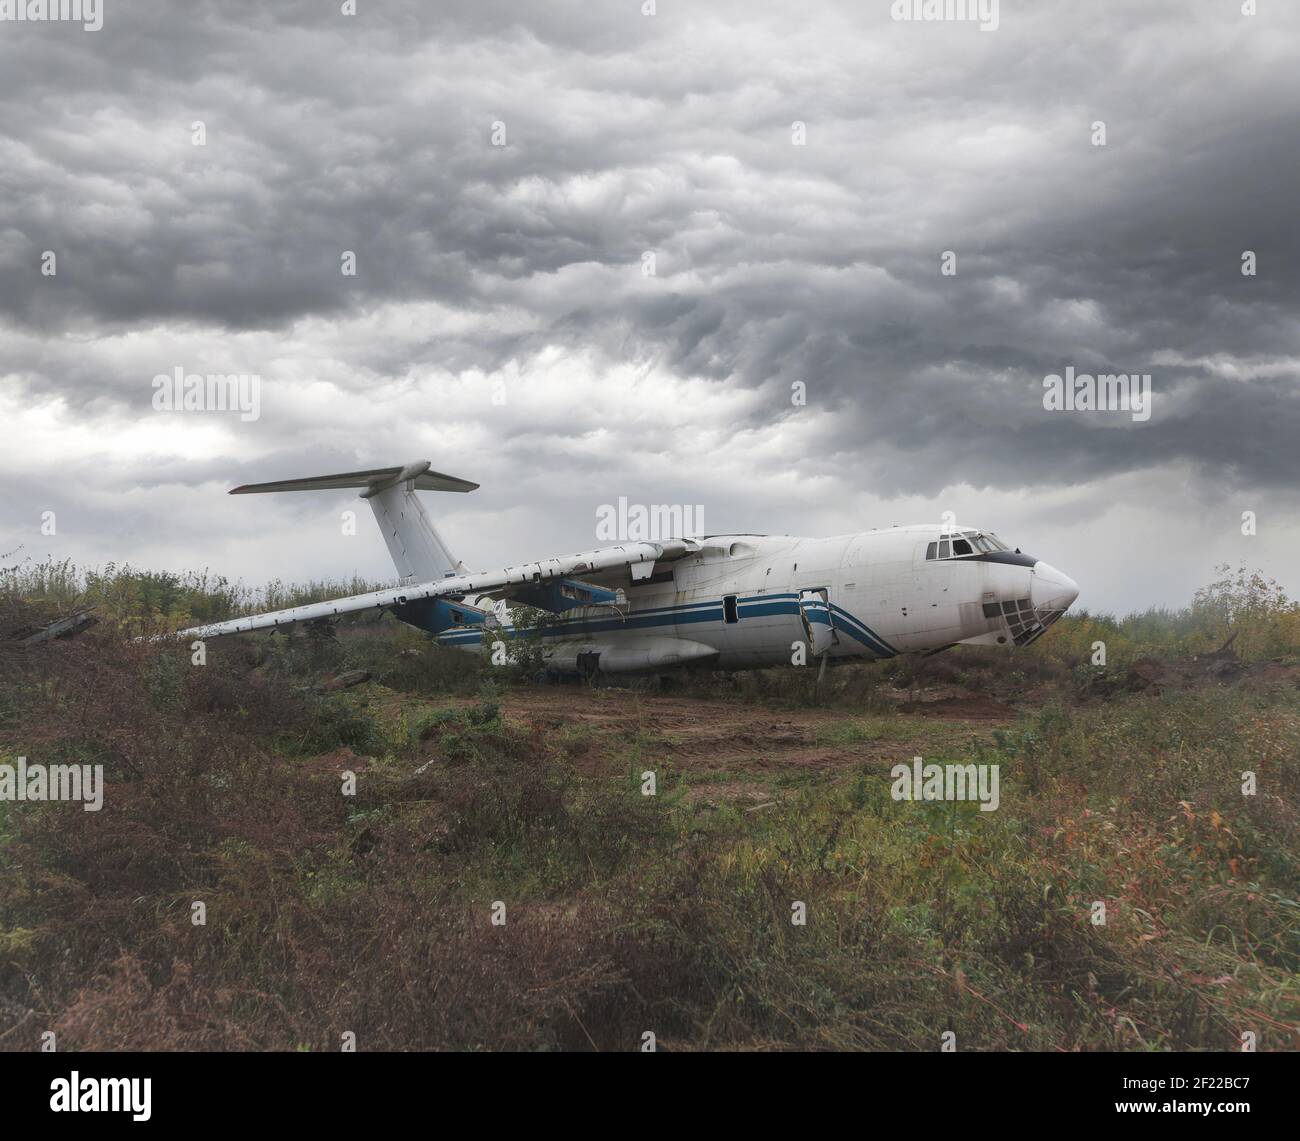 Old Soviet cargo plane IL-76 on the ground in cloudy weather. High quality photo Stock Photo